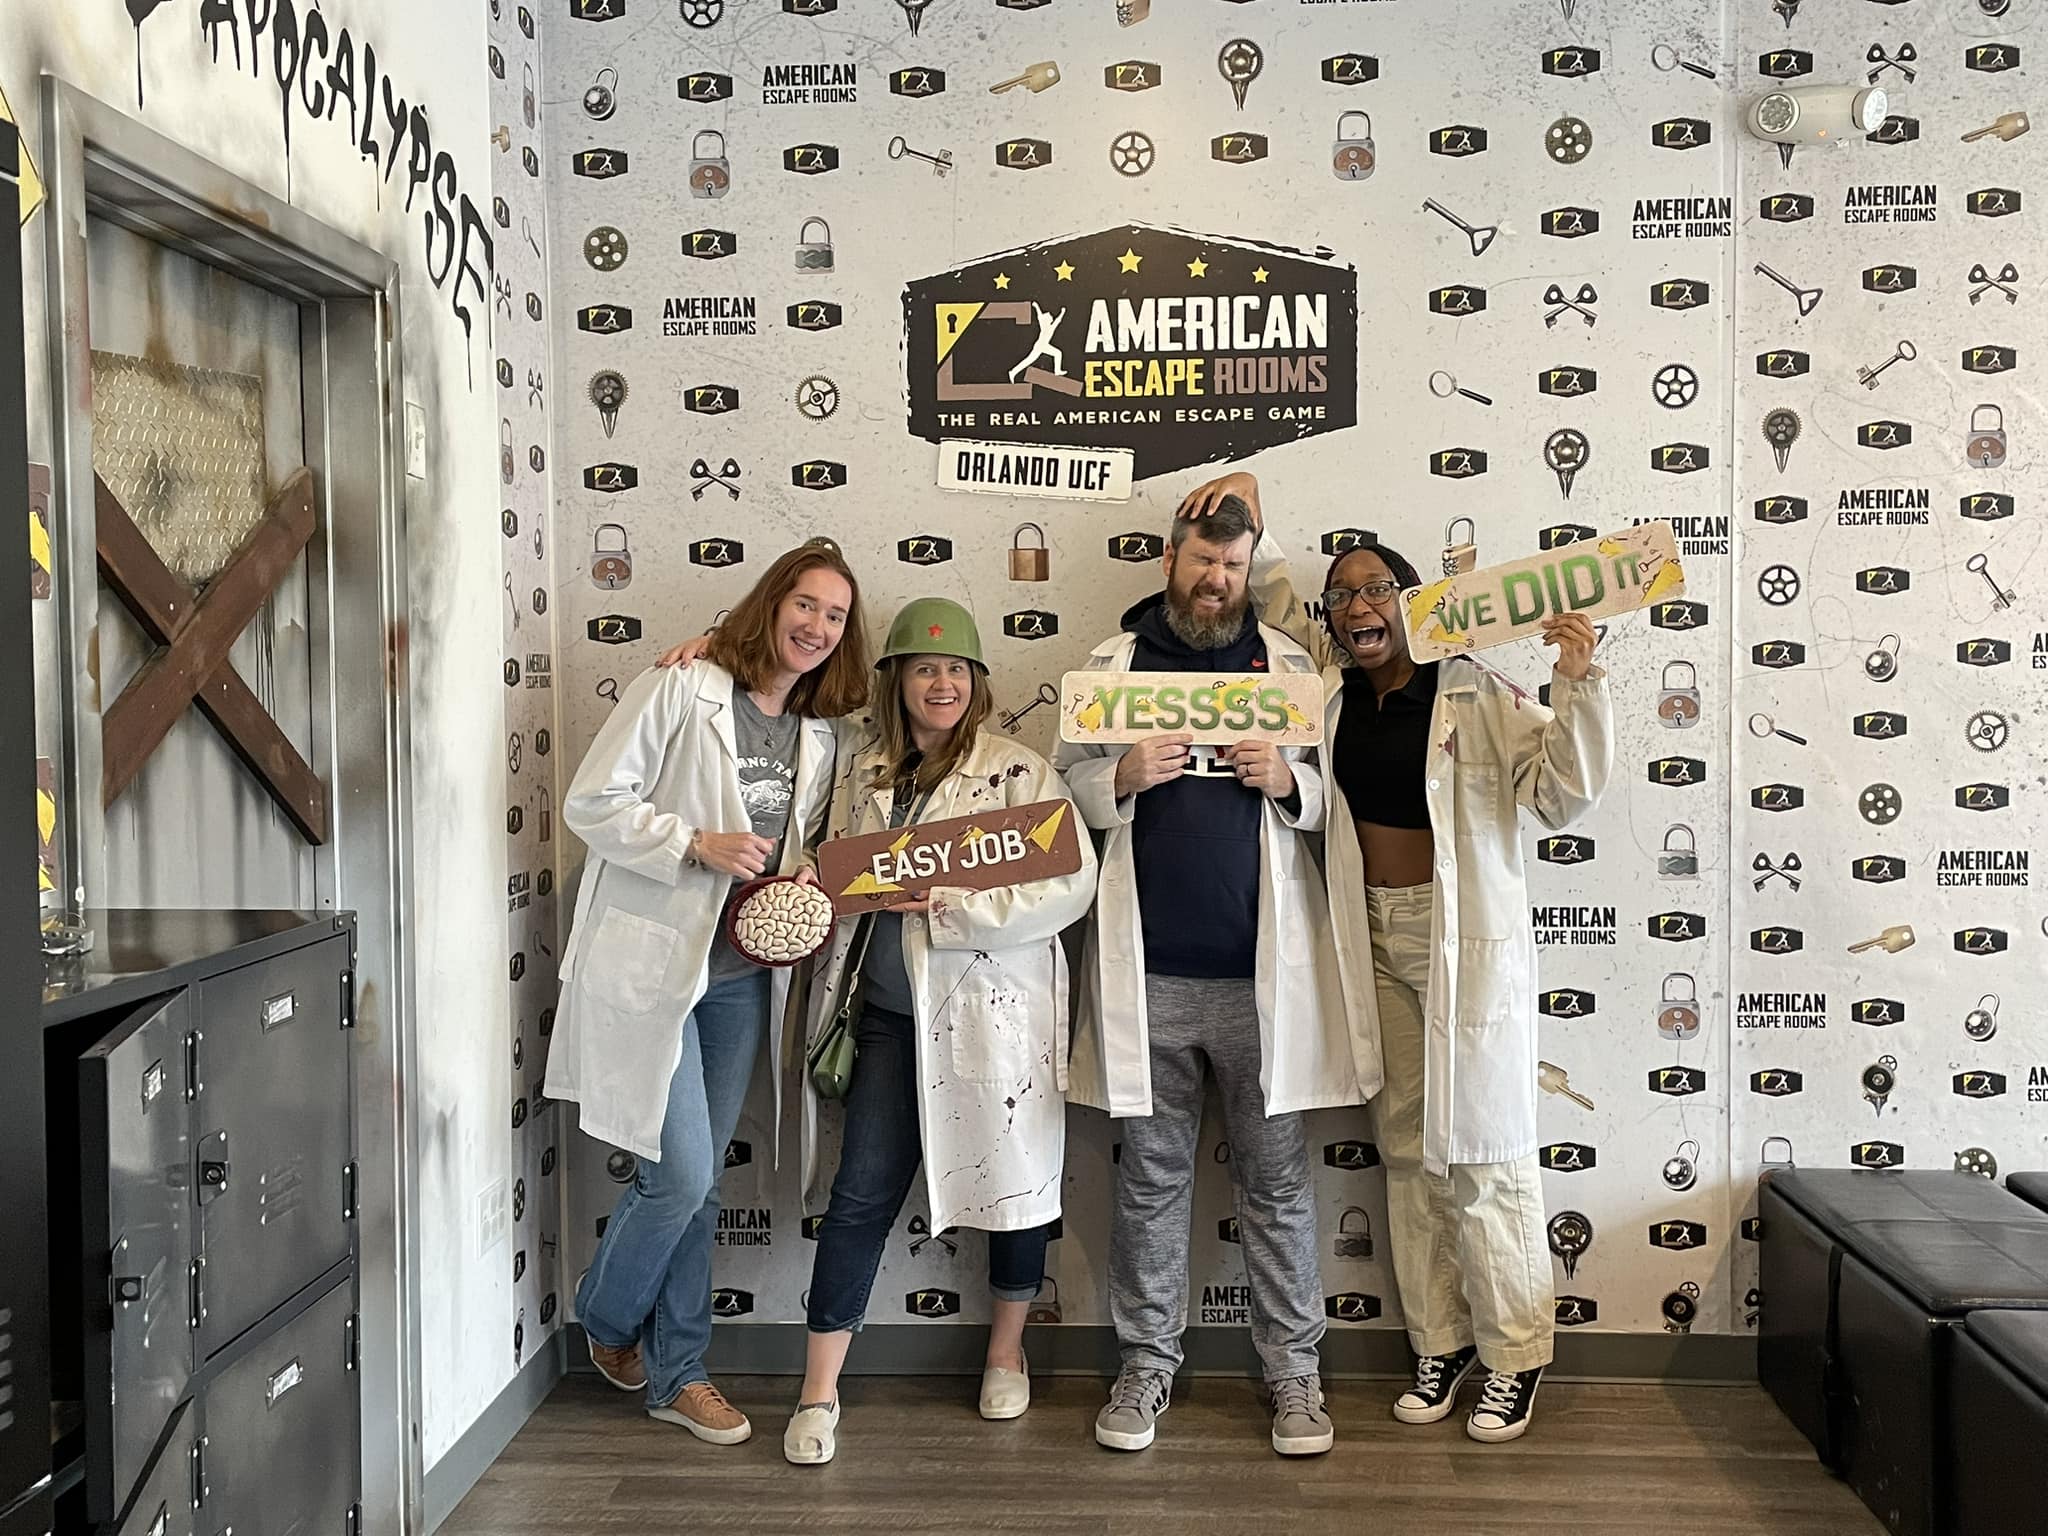 Aull the Winners played the Zombie Apocalypse - Orlando and finished the game with 14 minutes 55seconds left. Congratulations! Well done!